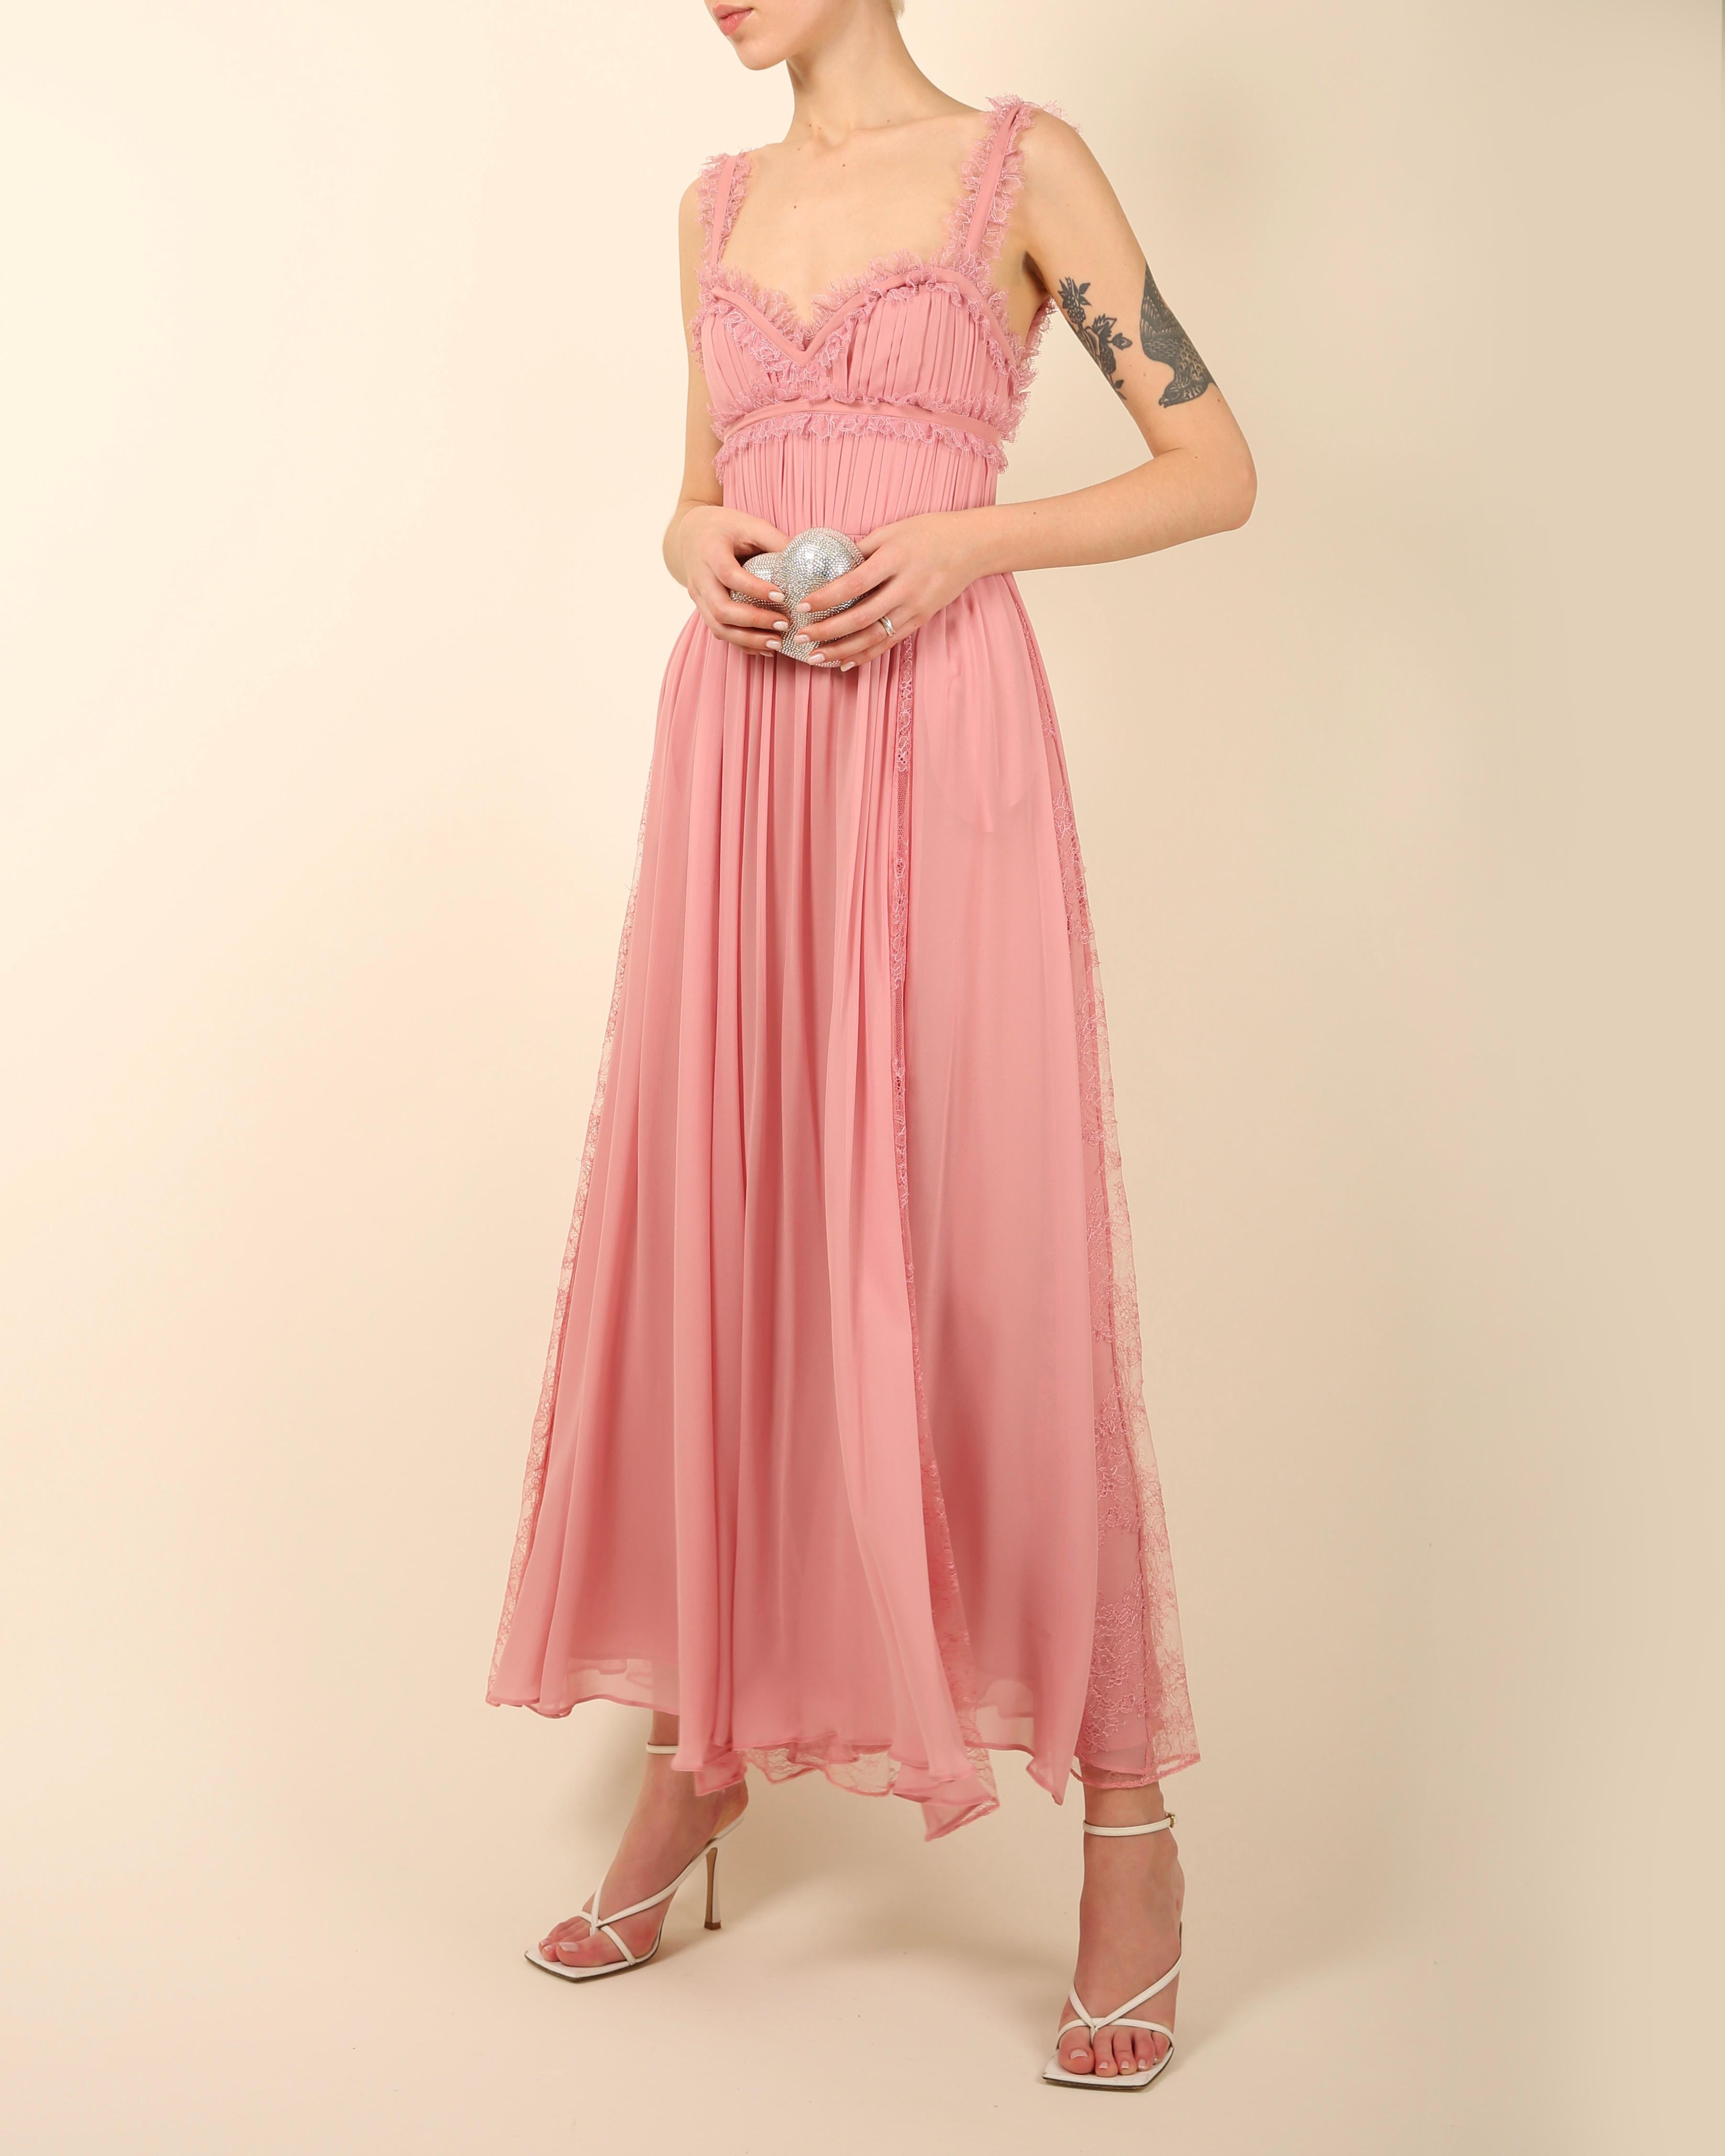 Elie Saab pink lace trimmed cut out corset bustier maxi dress gown 34 For Sale 5